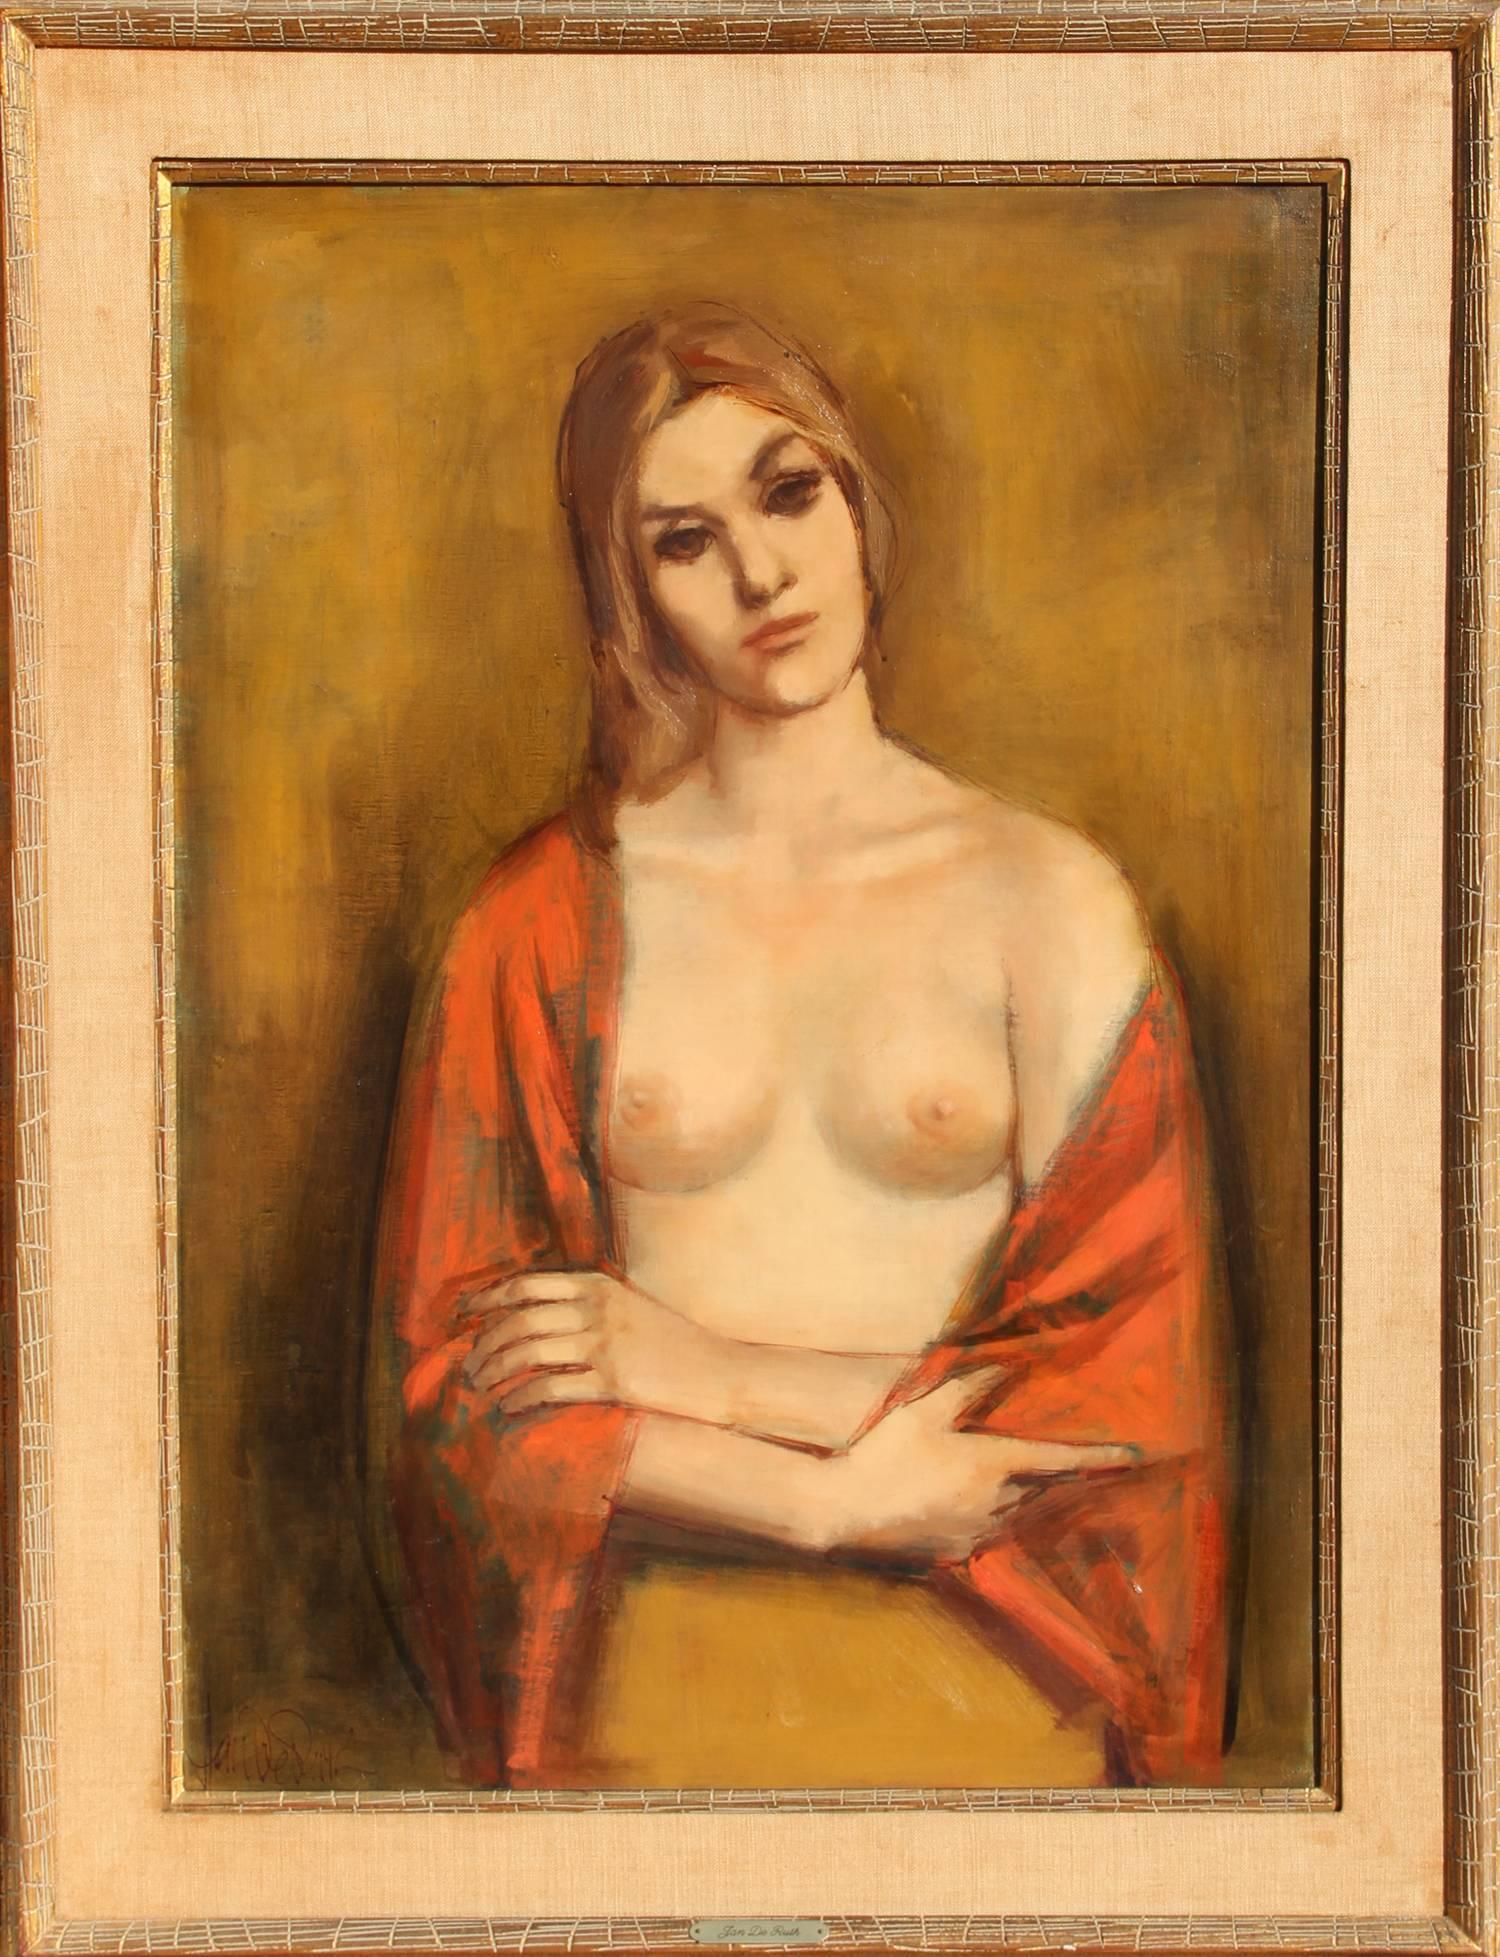 Crossed Arms (Portrait of a Blond)